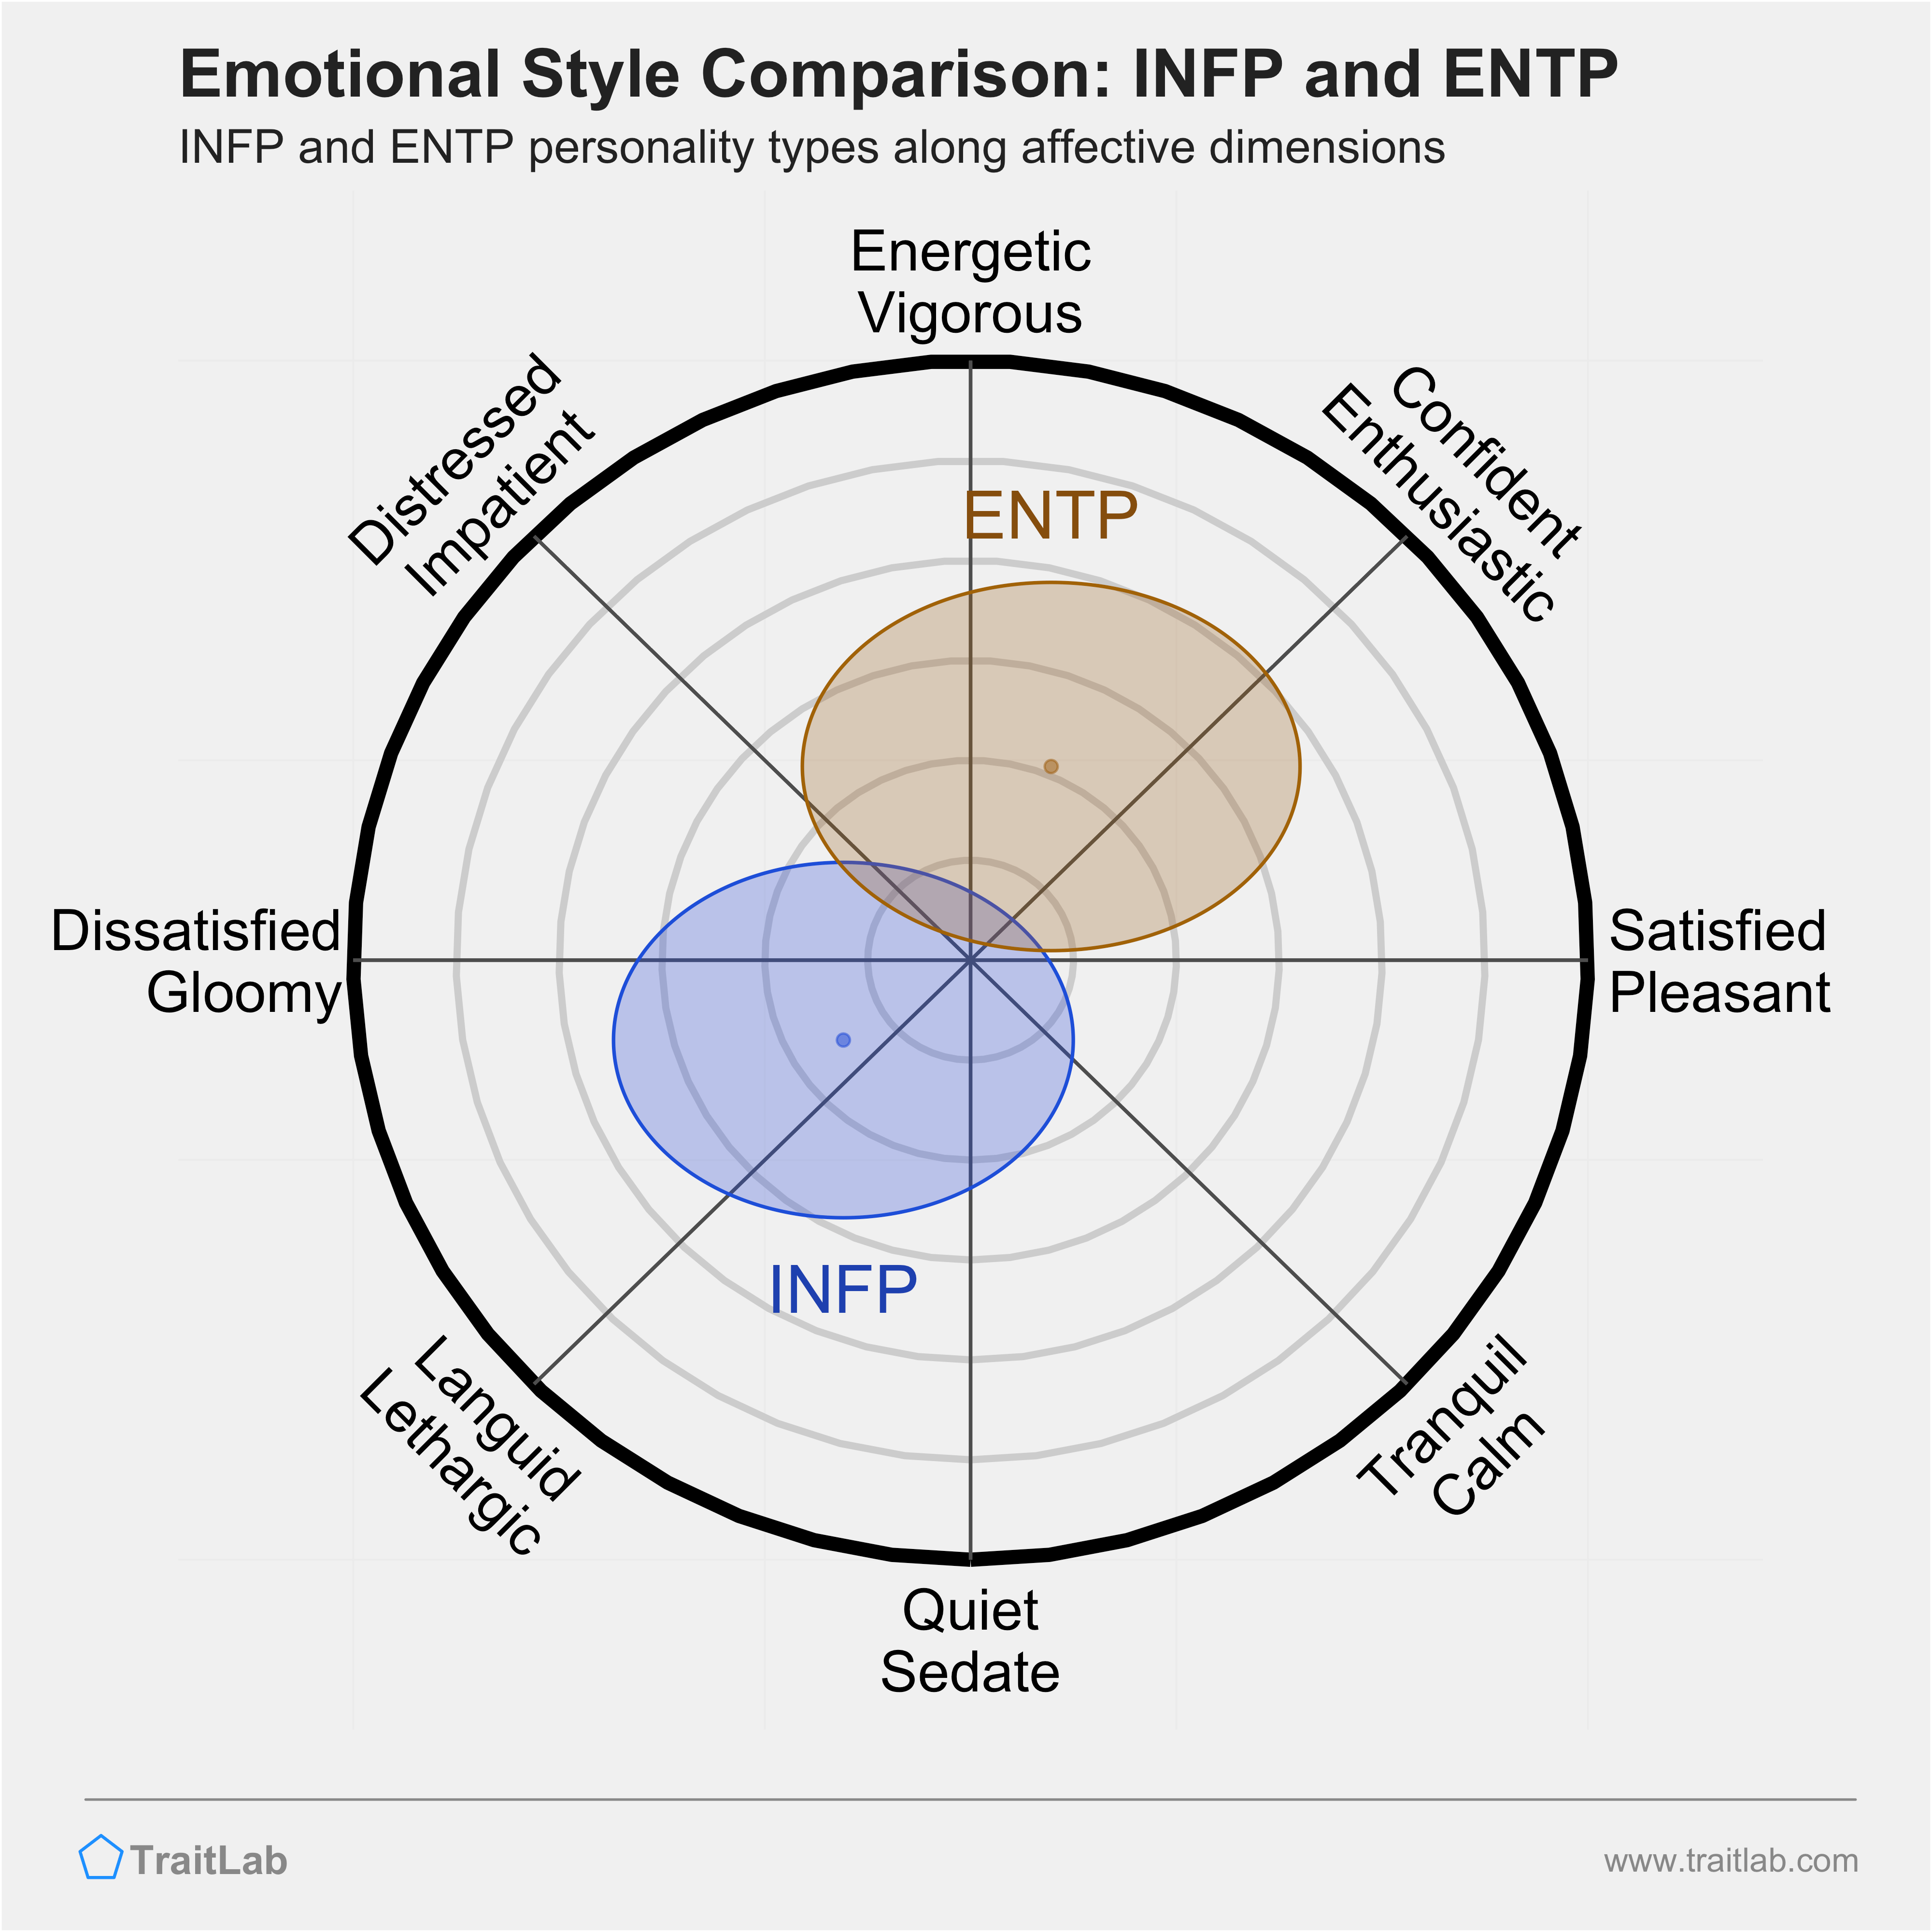 INFP and ENTP comparison across emotional (affective) dimensions